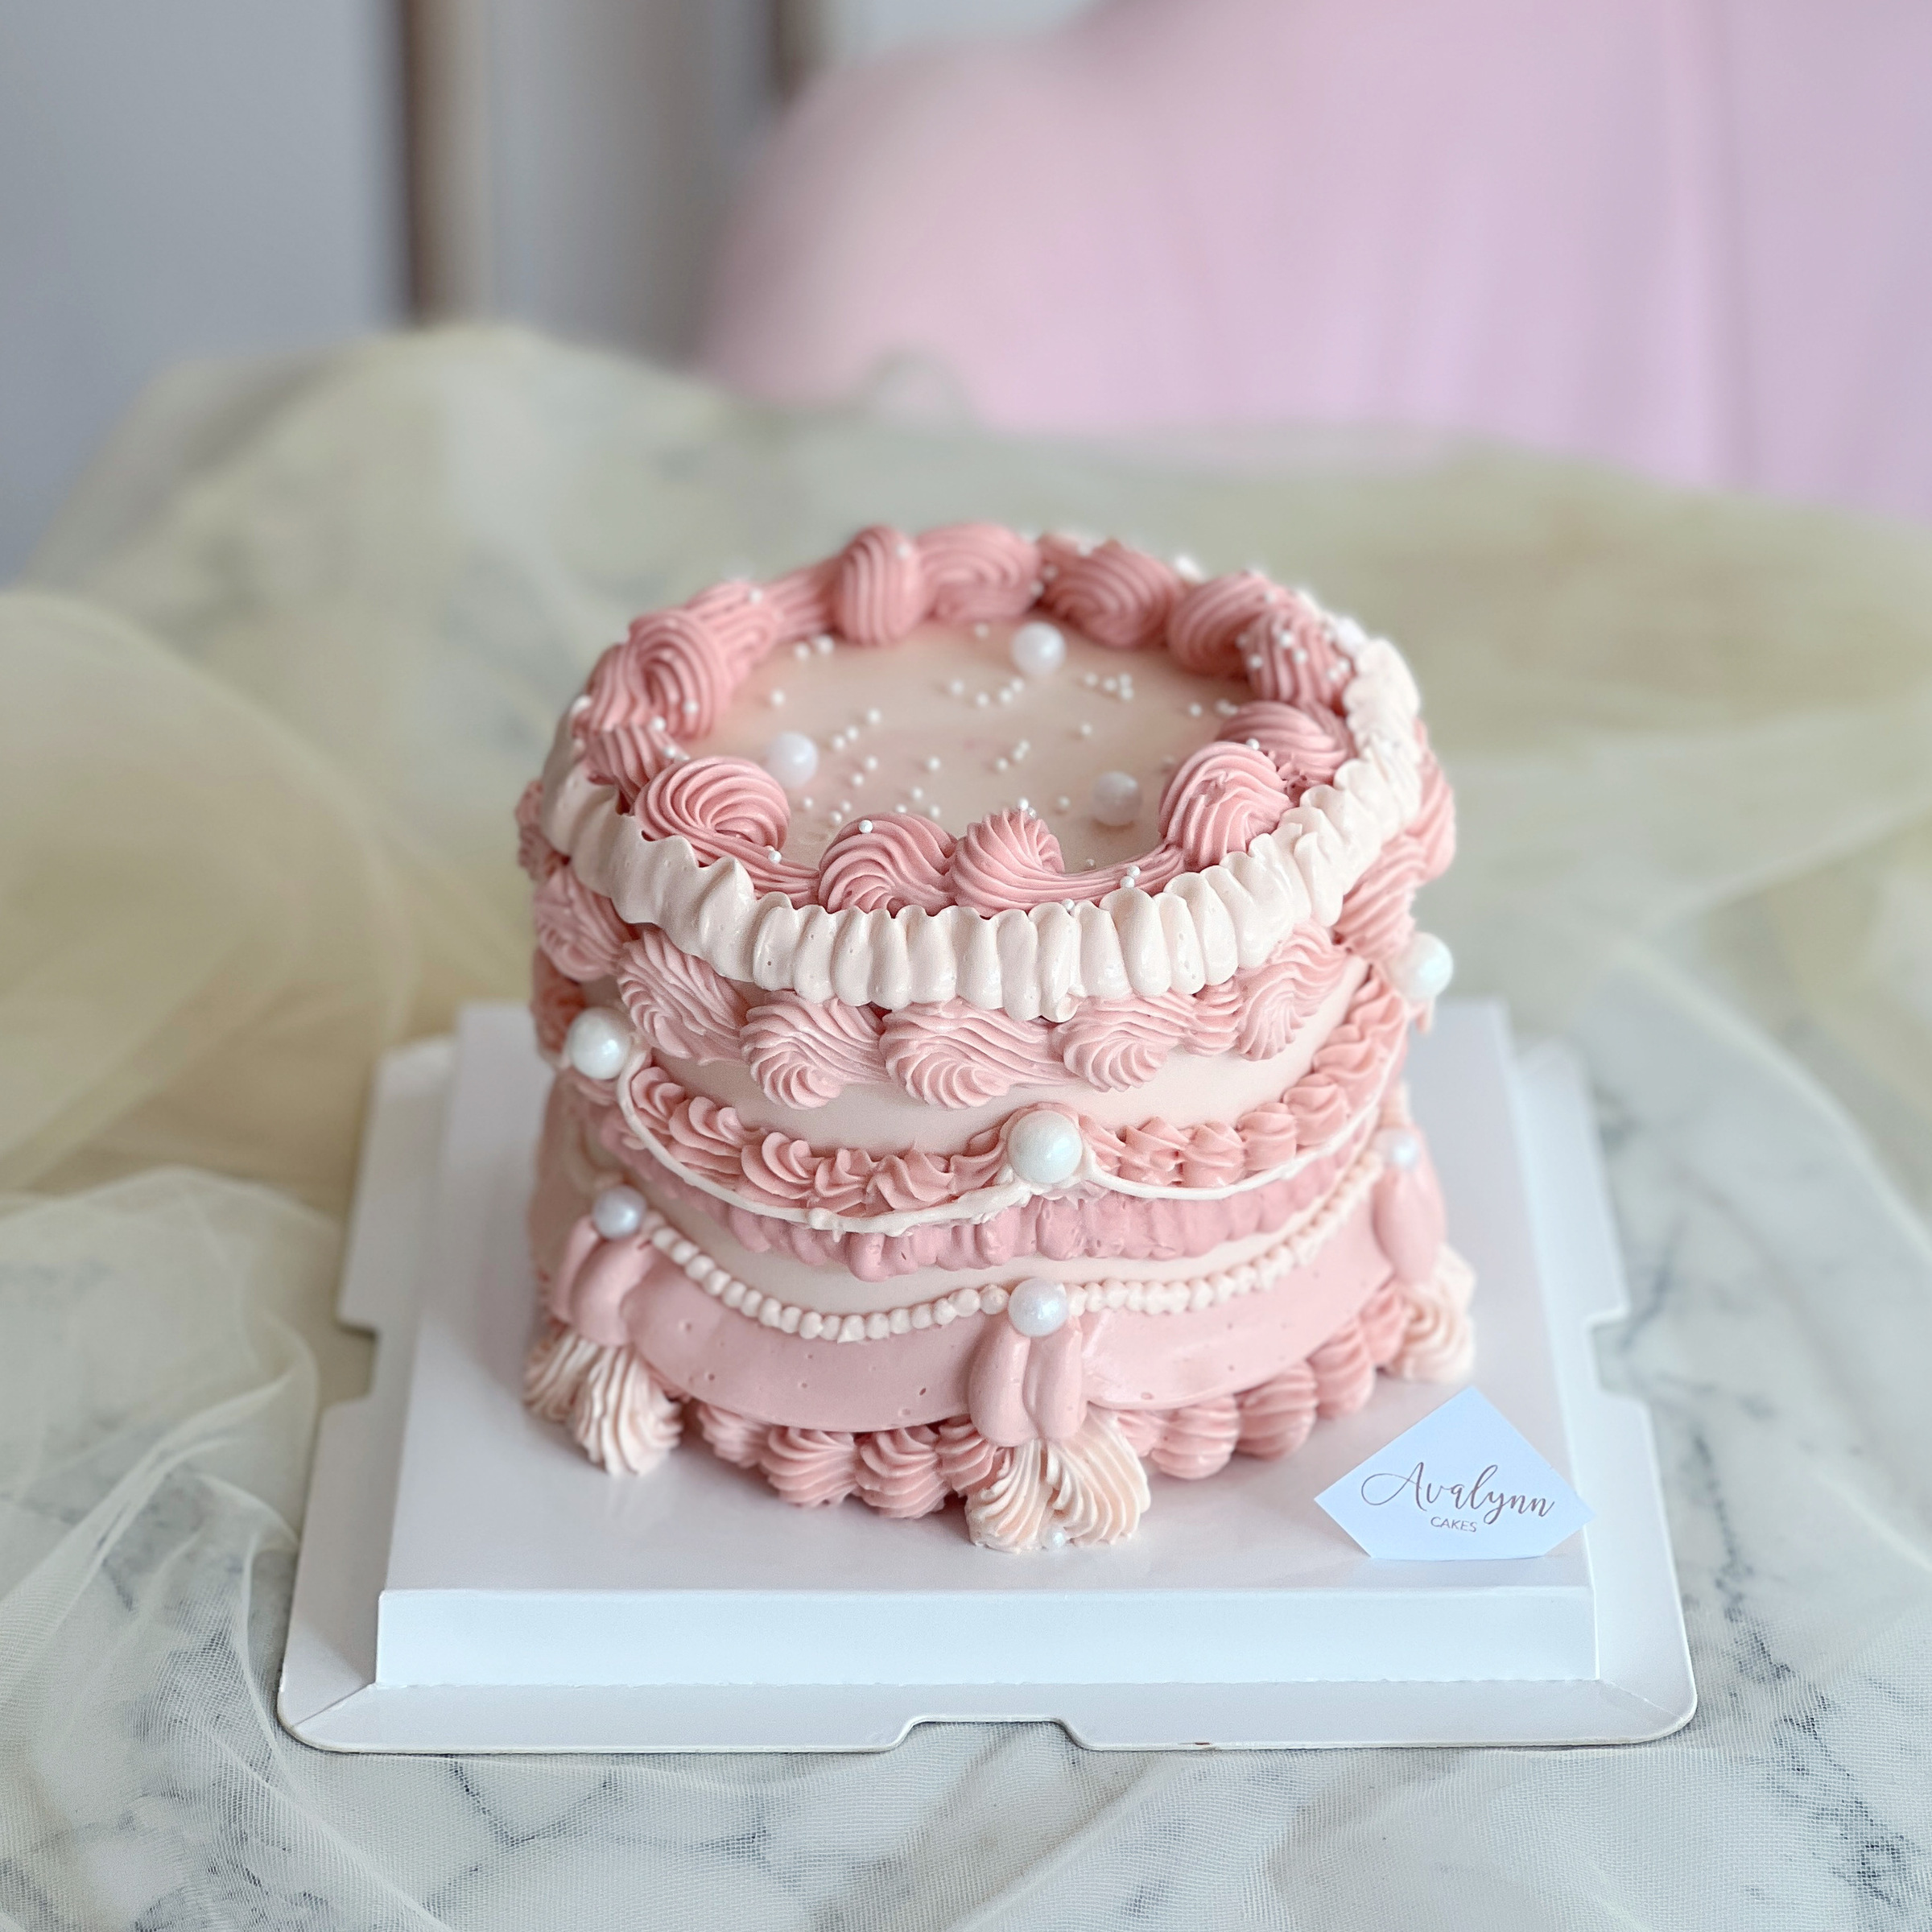 50 Vintage Buttercream Cakes to Lust After | PARTY INSPO | Now thats Peachy